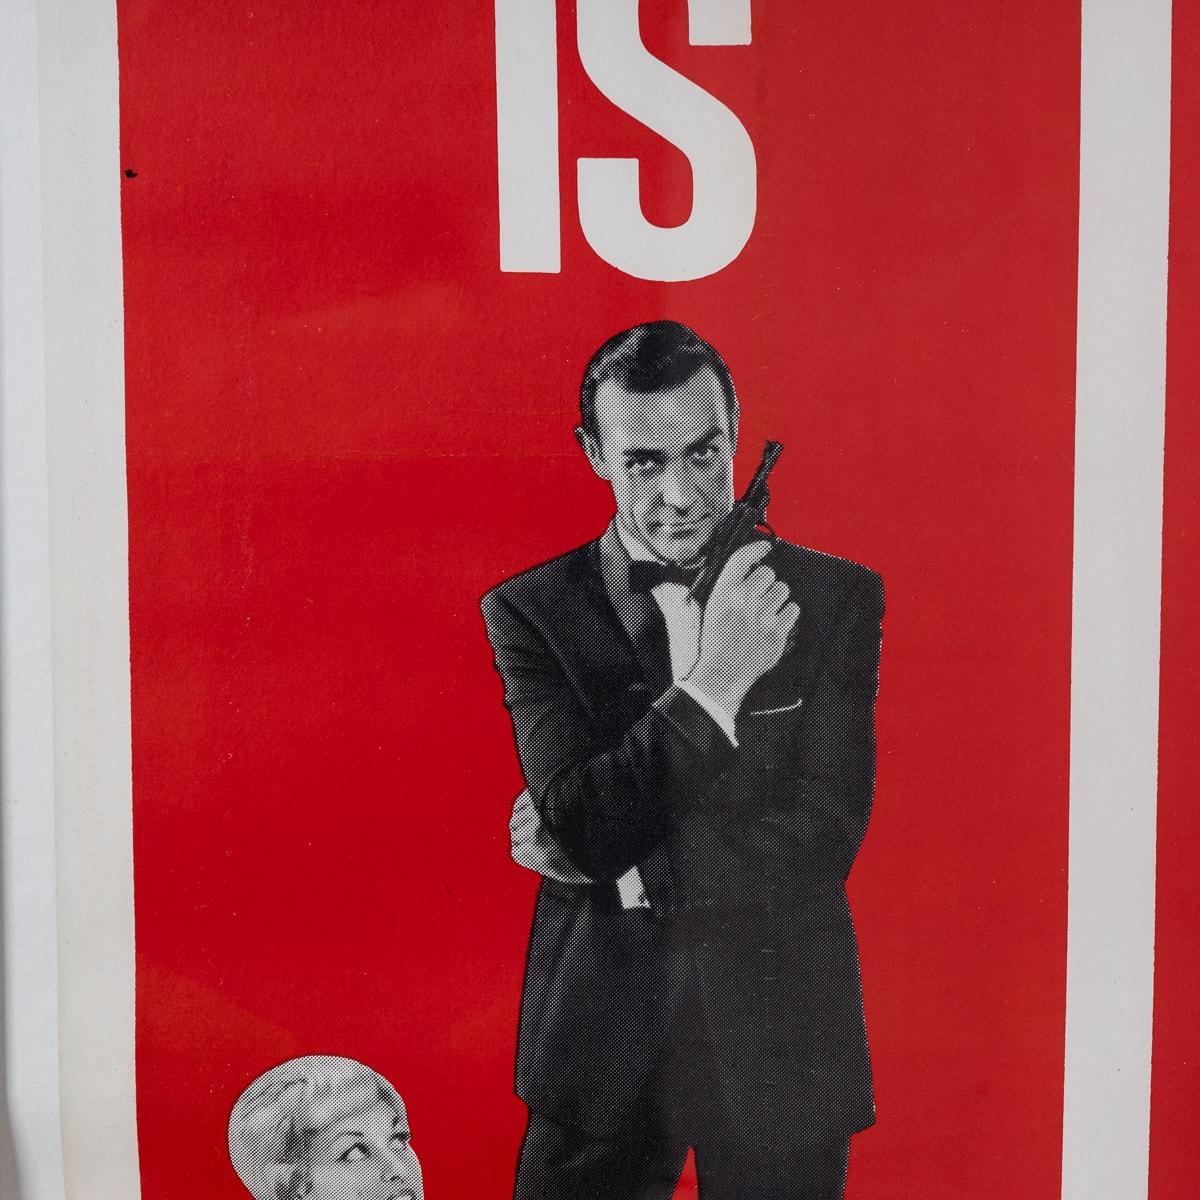 Original American (U.S) Release James Bond 'From Russia With Love' Poster c.1963 For Sale 4